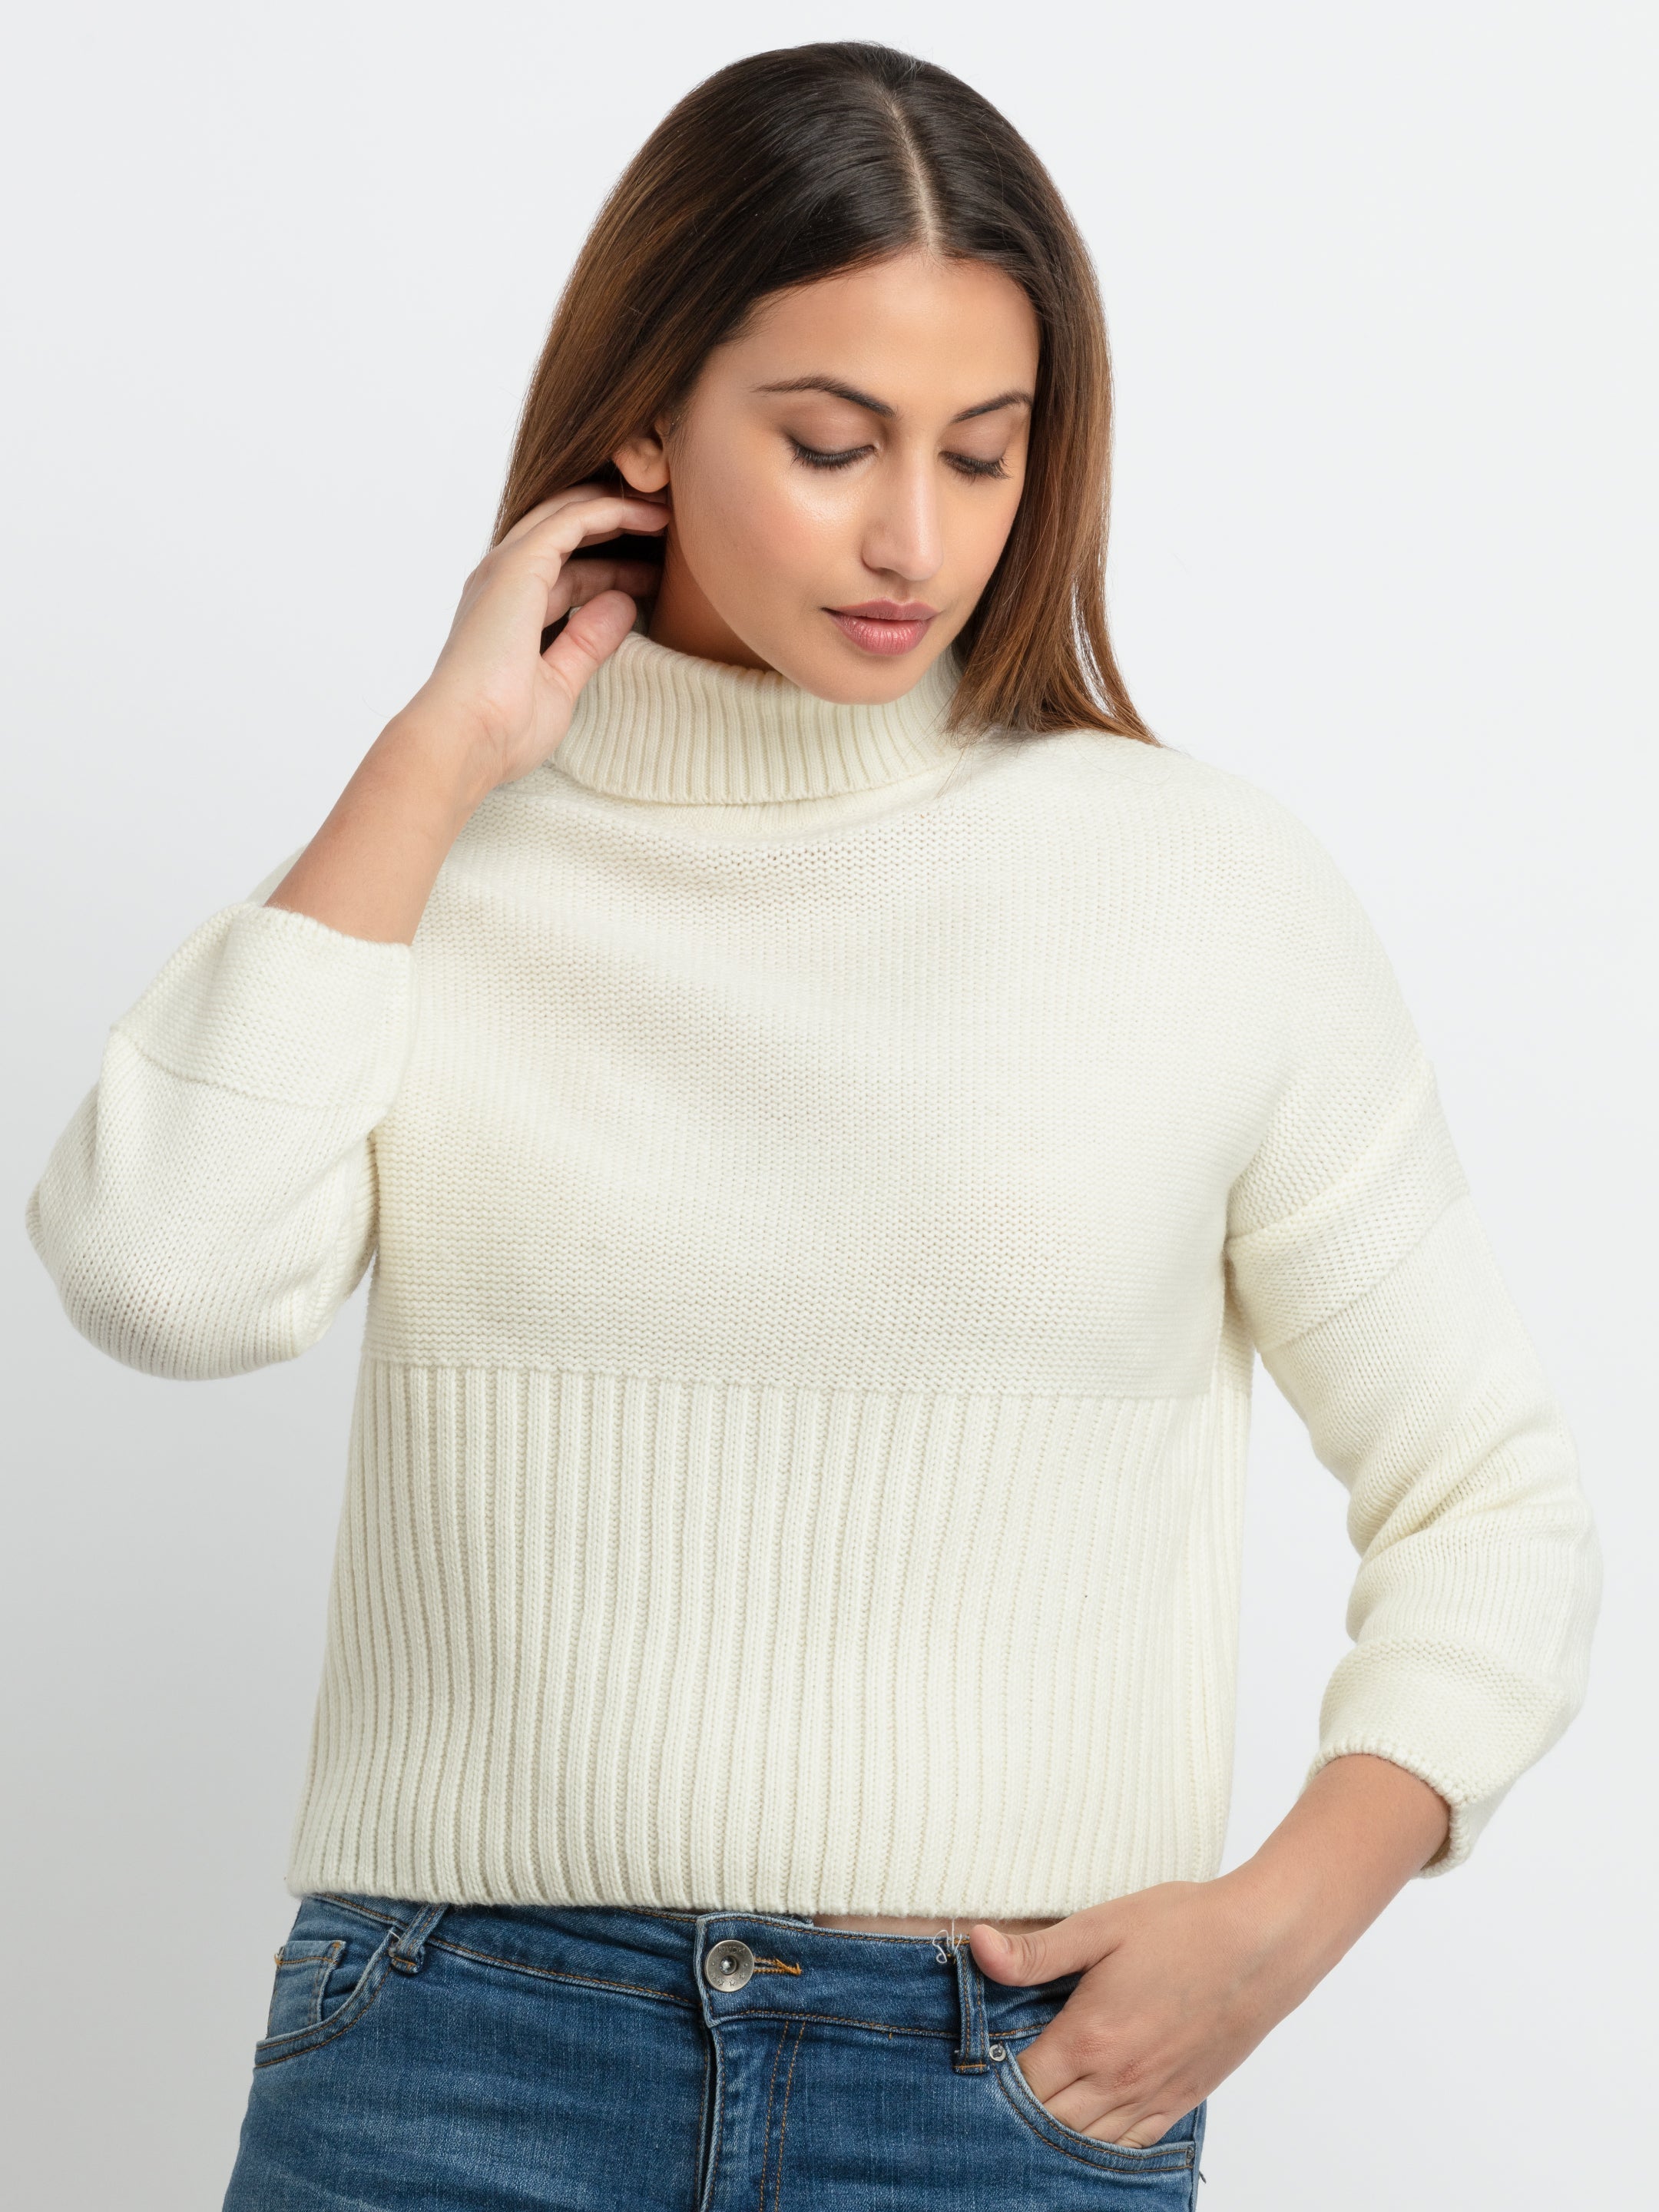 Womens Solid Turtle Neck Sweater - S / Off White / SQW-FK-22976-Off White